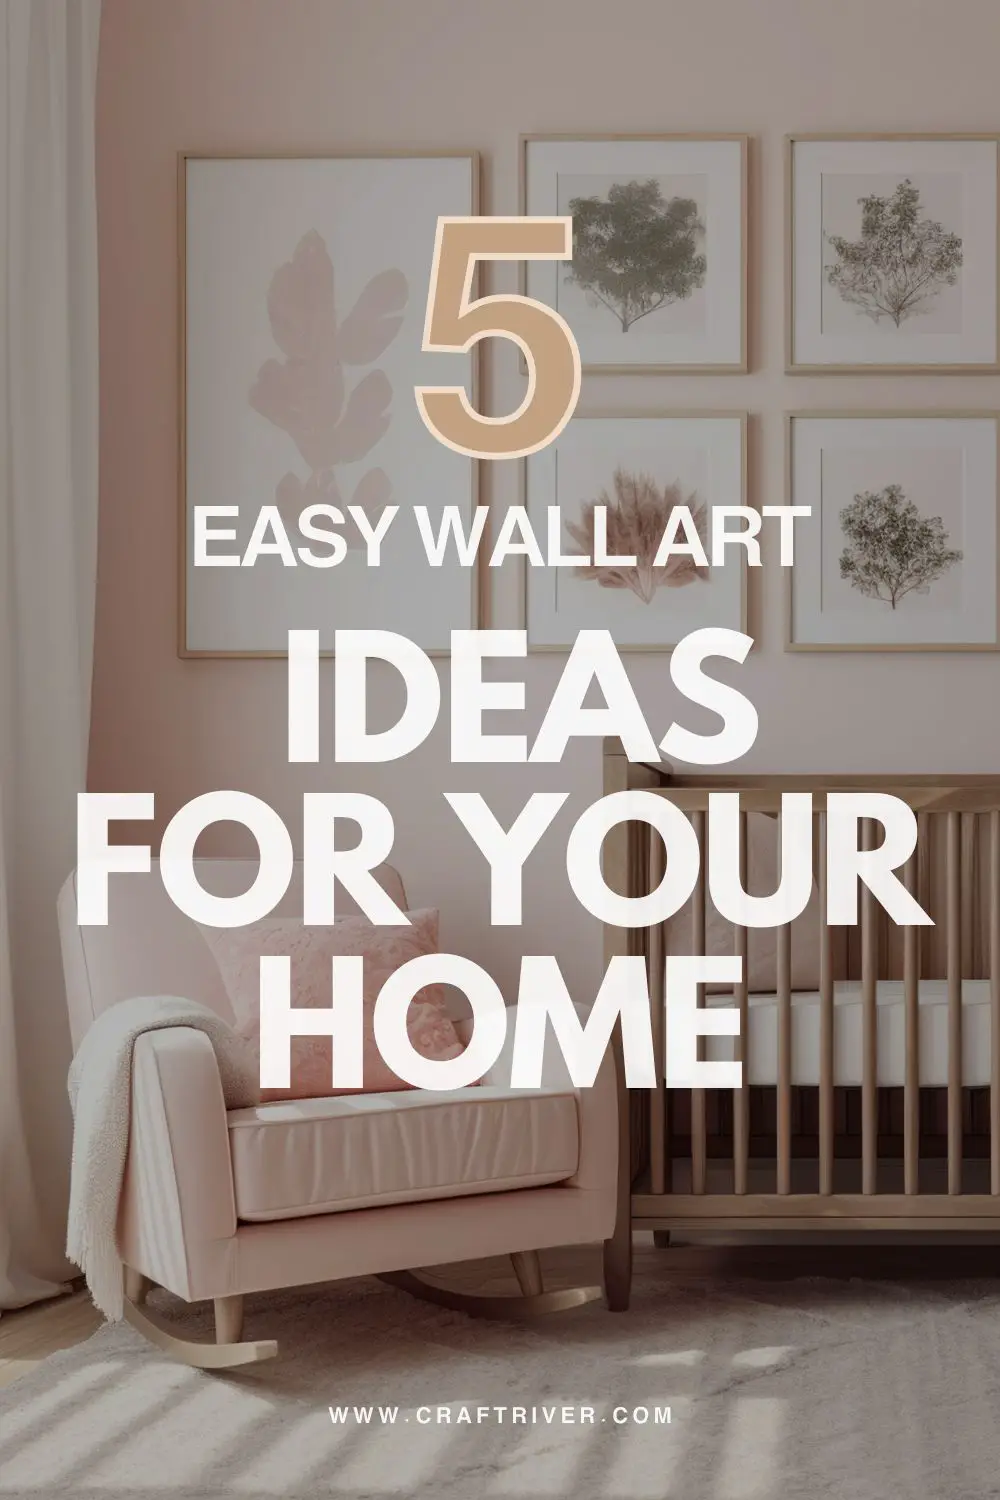 Easy Wall Art Ideas for Your Home